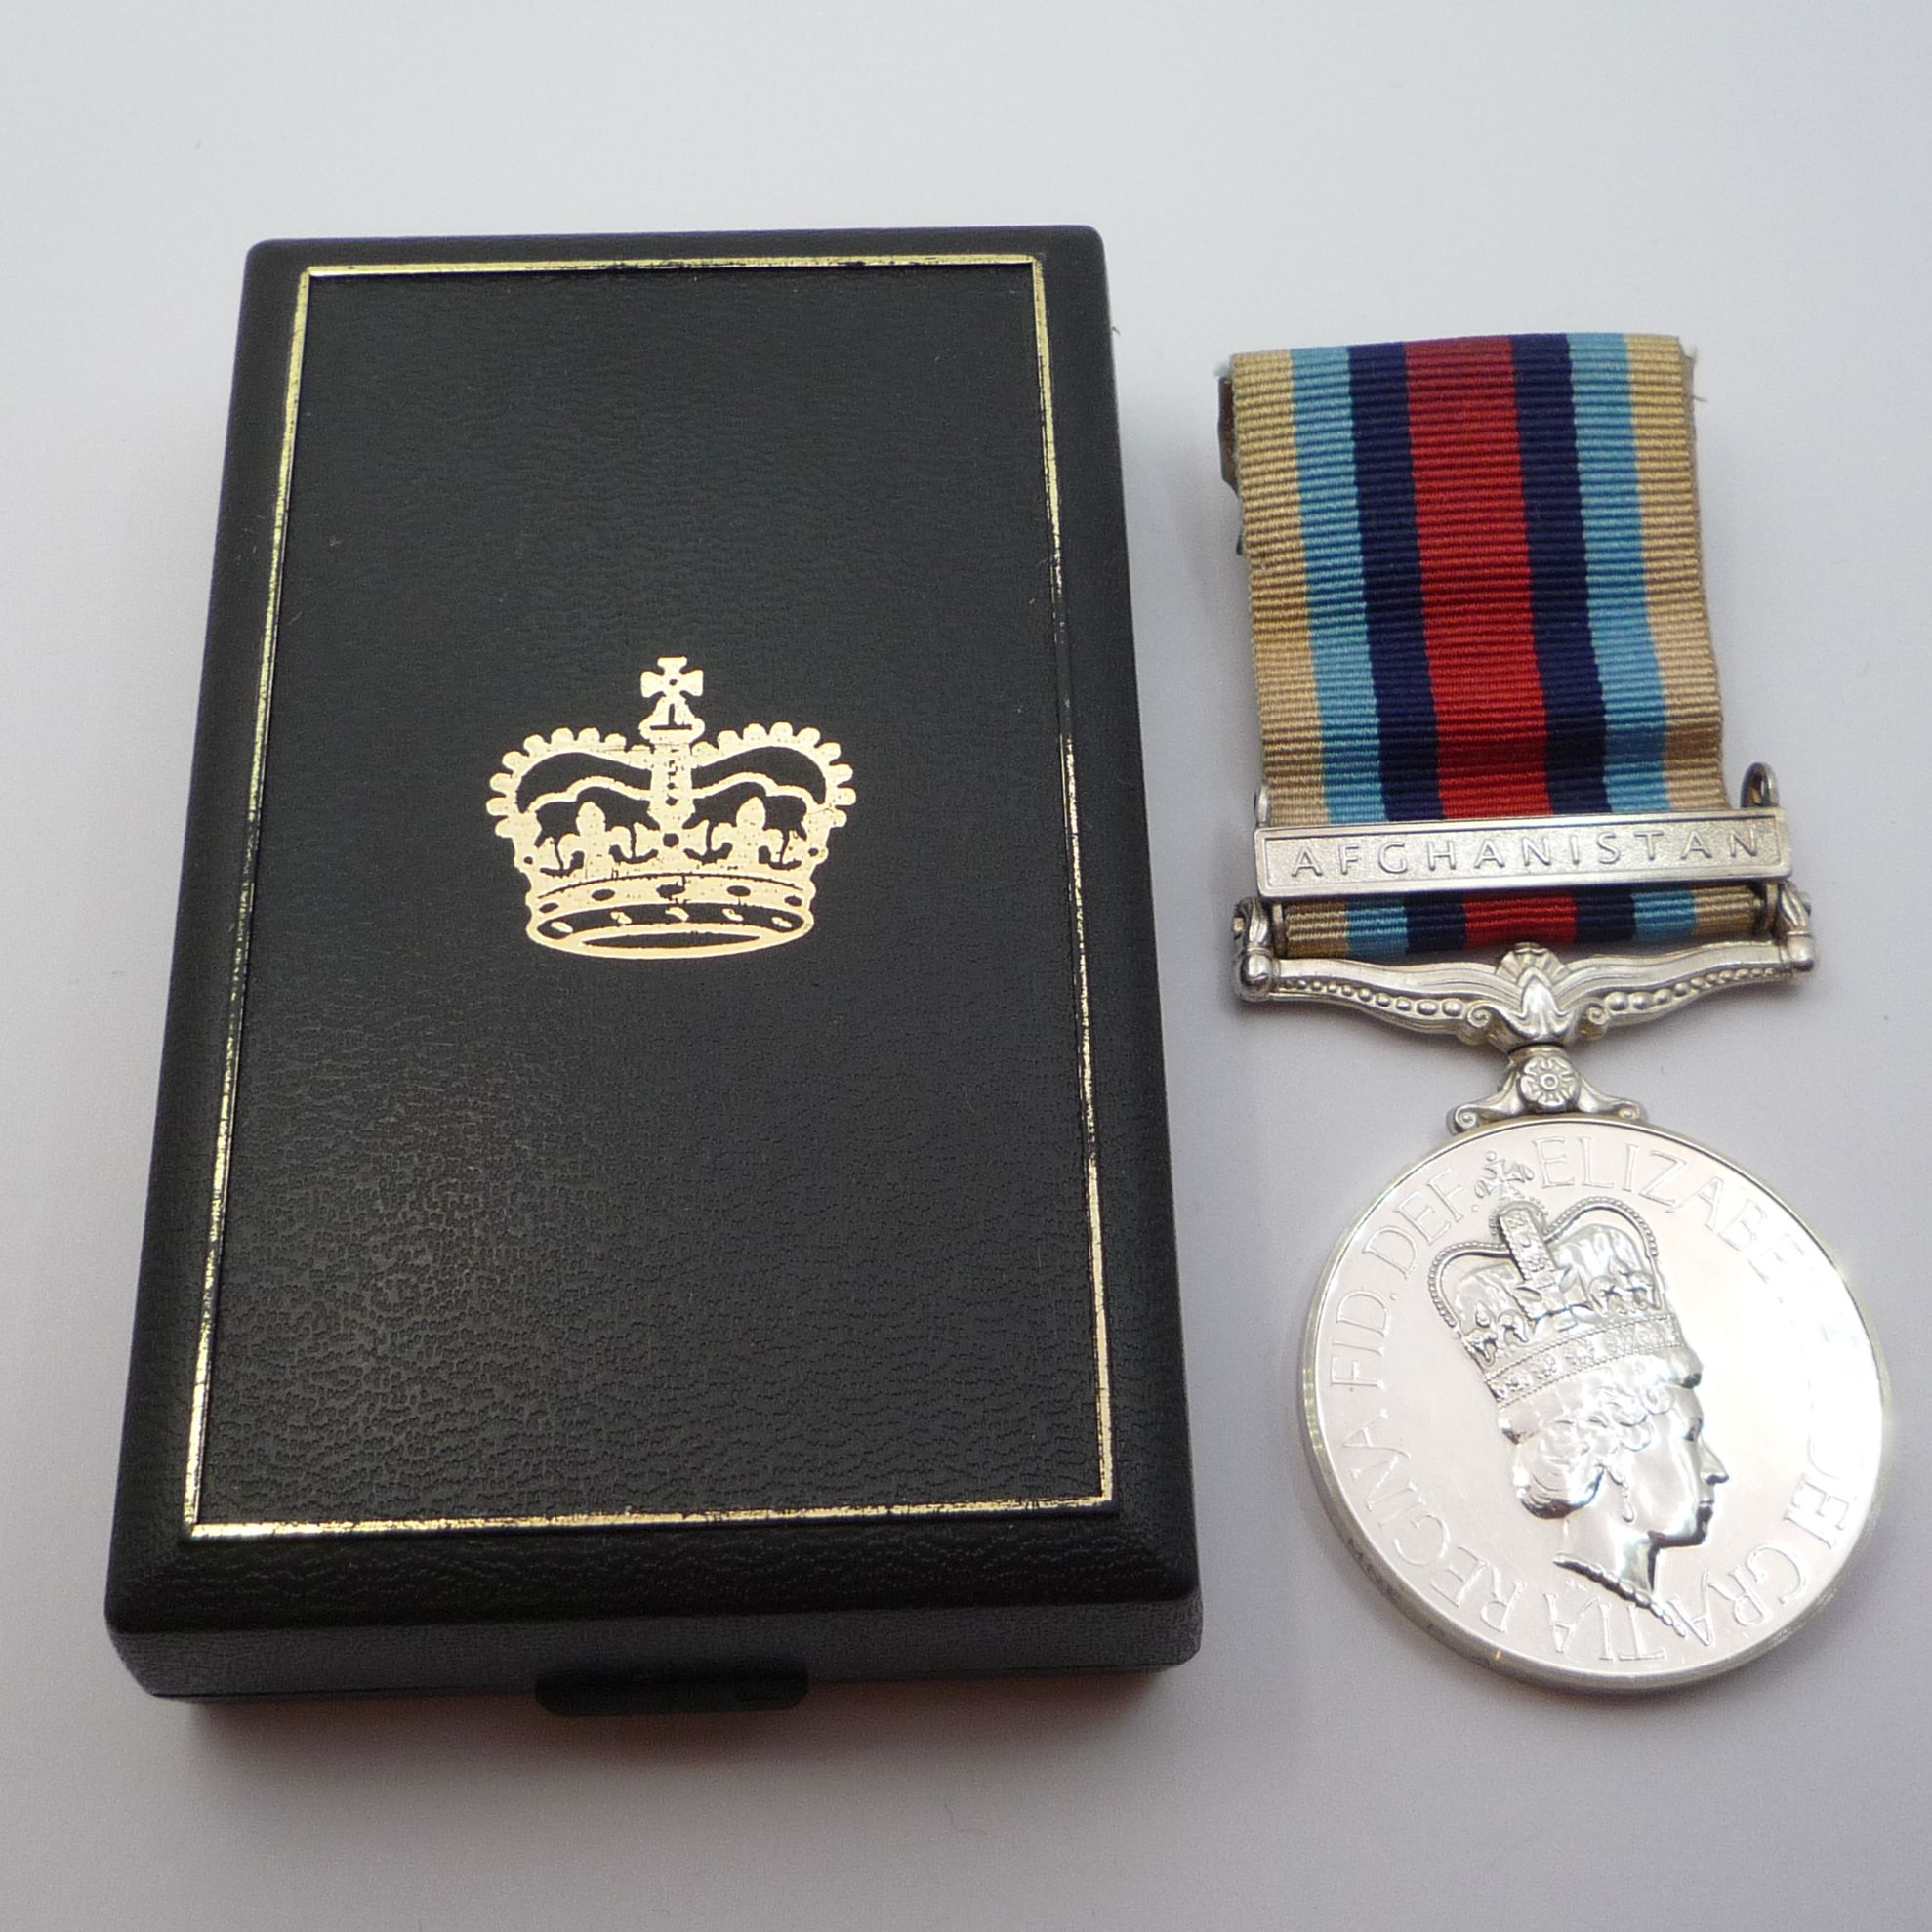 operational service medal  with afghanistan c